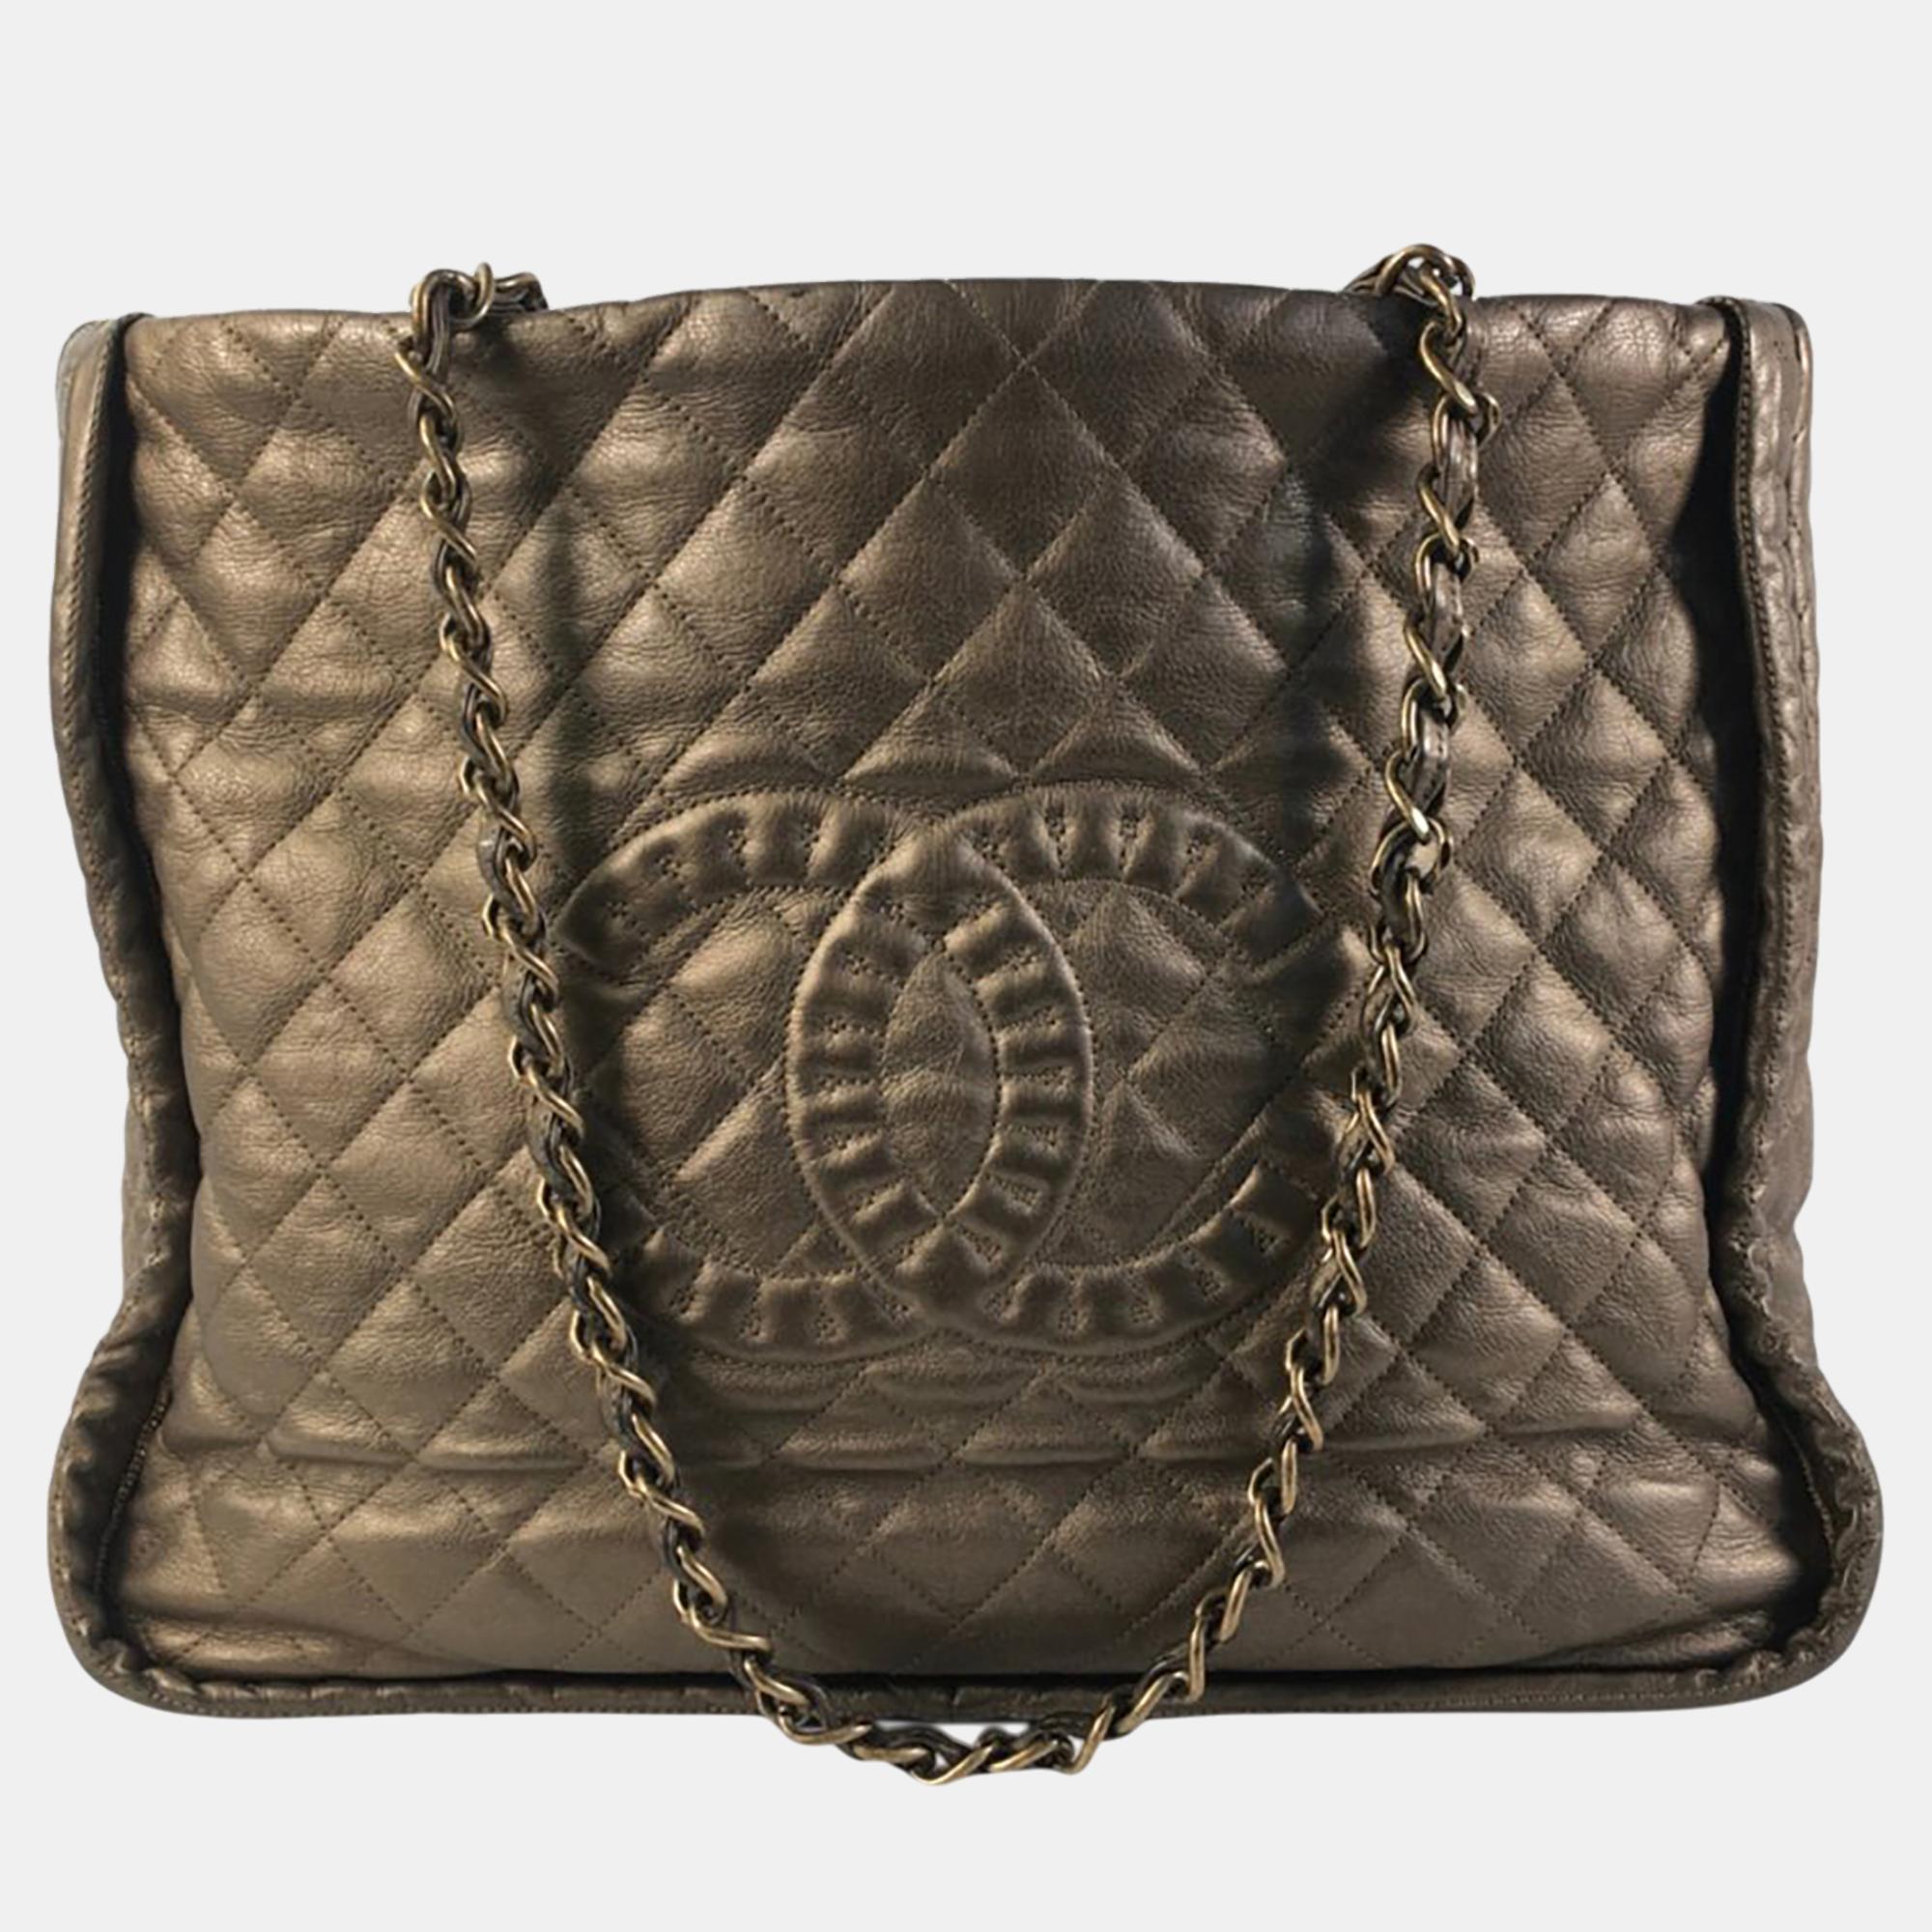 Chanel brown cc quilted calfskin istanbul tote